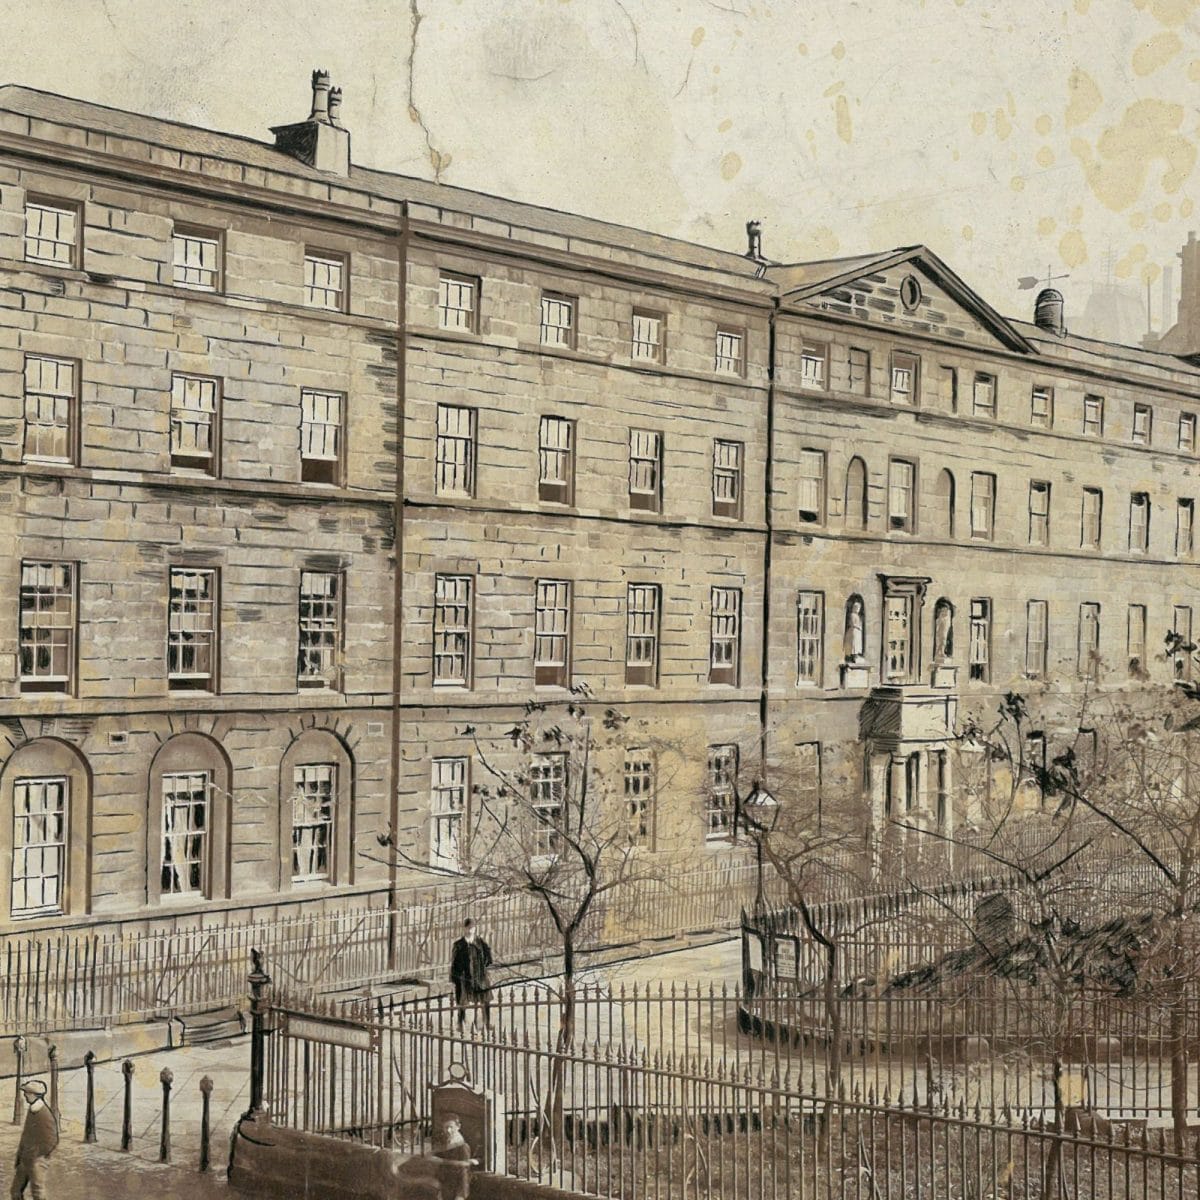 An etching of the original site of the Blue Coat School in 1910